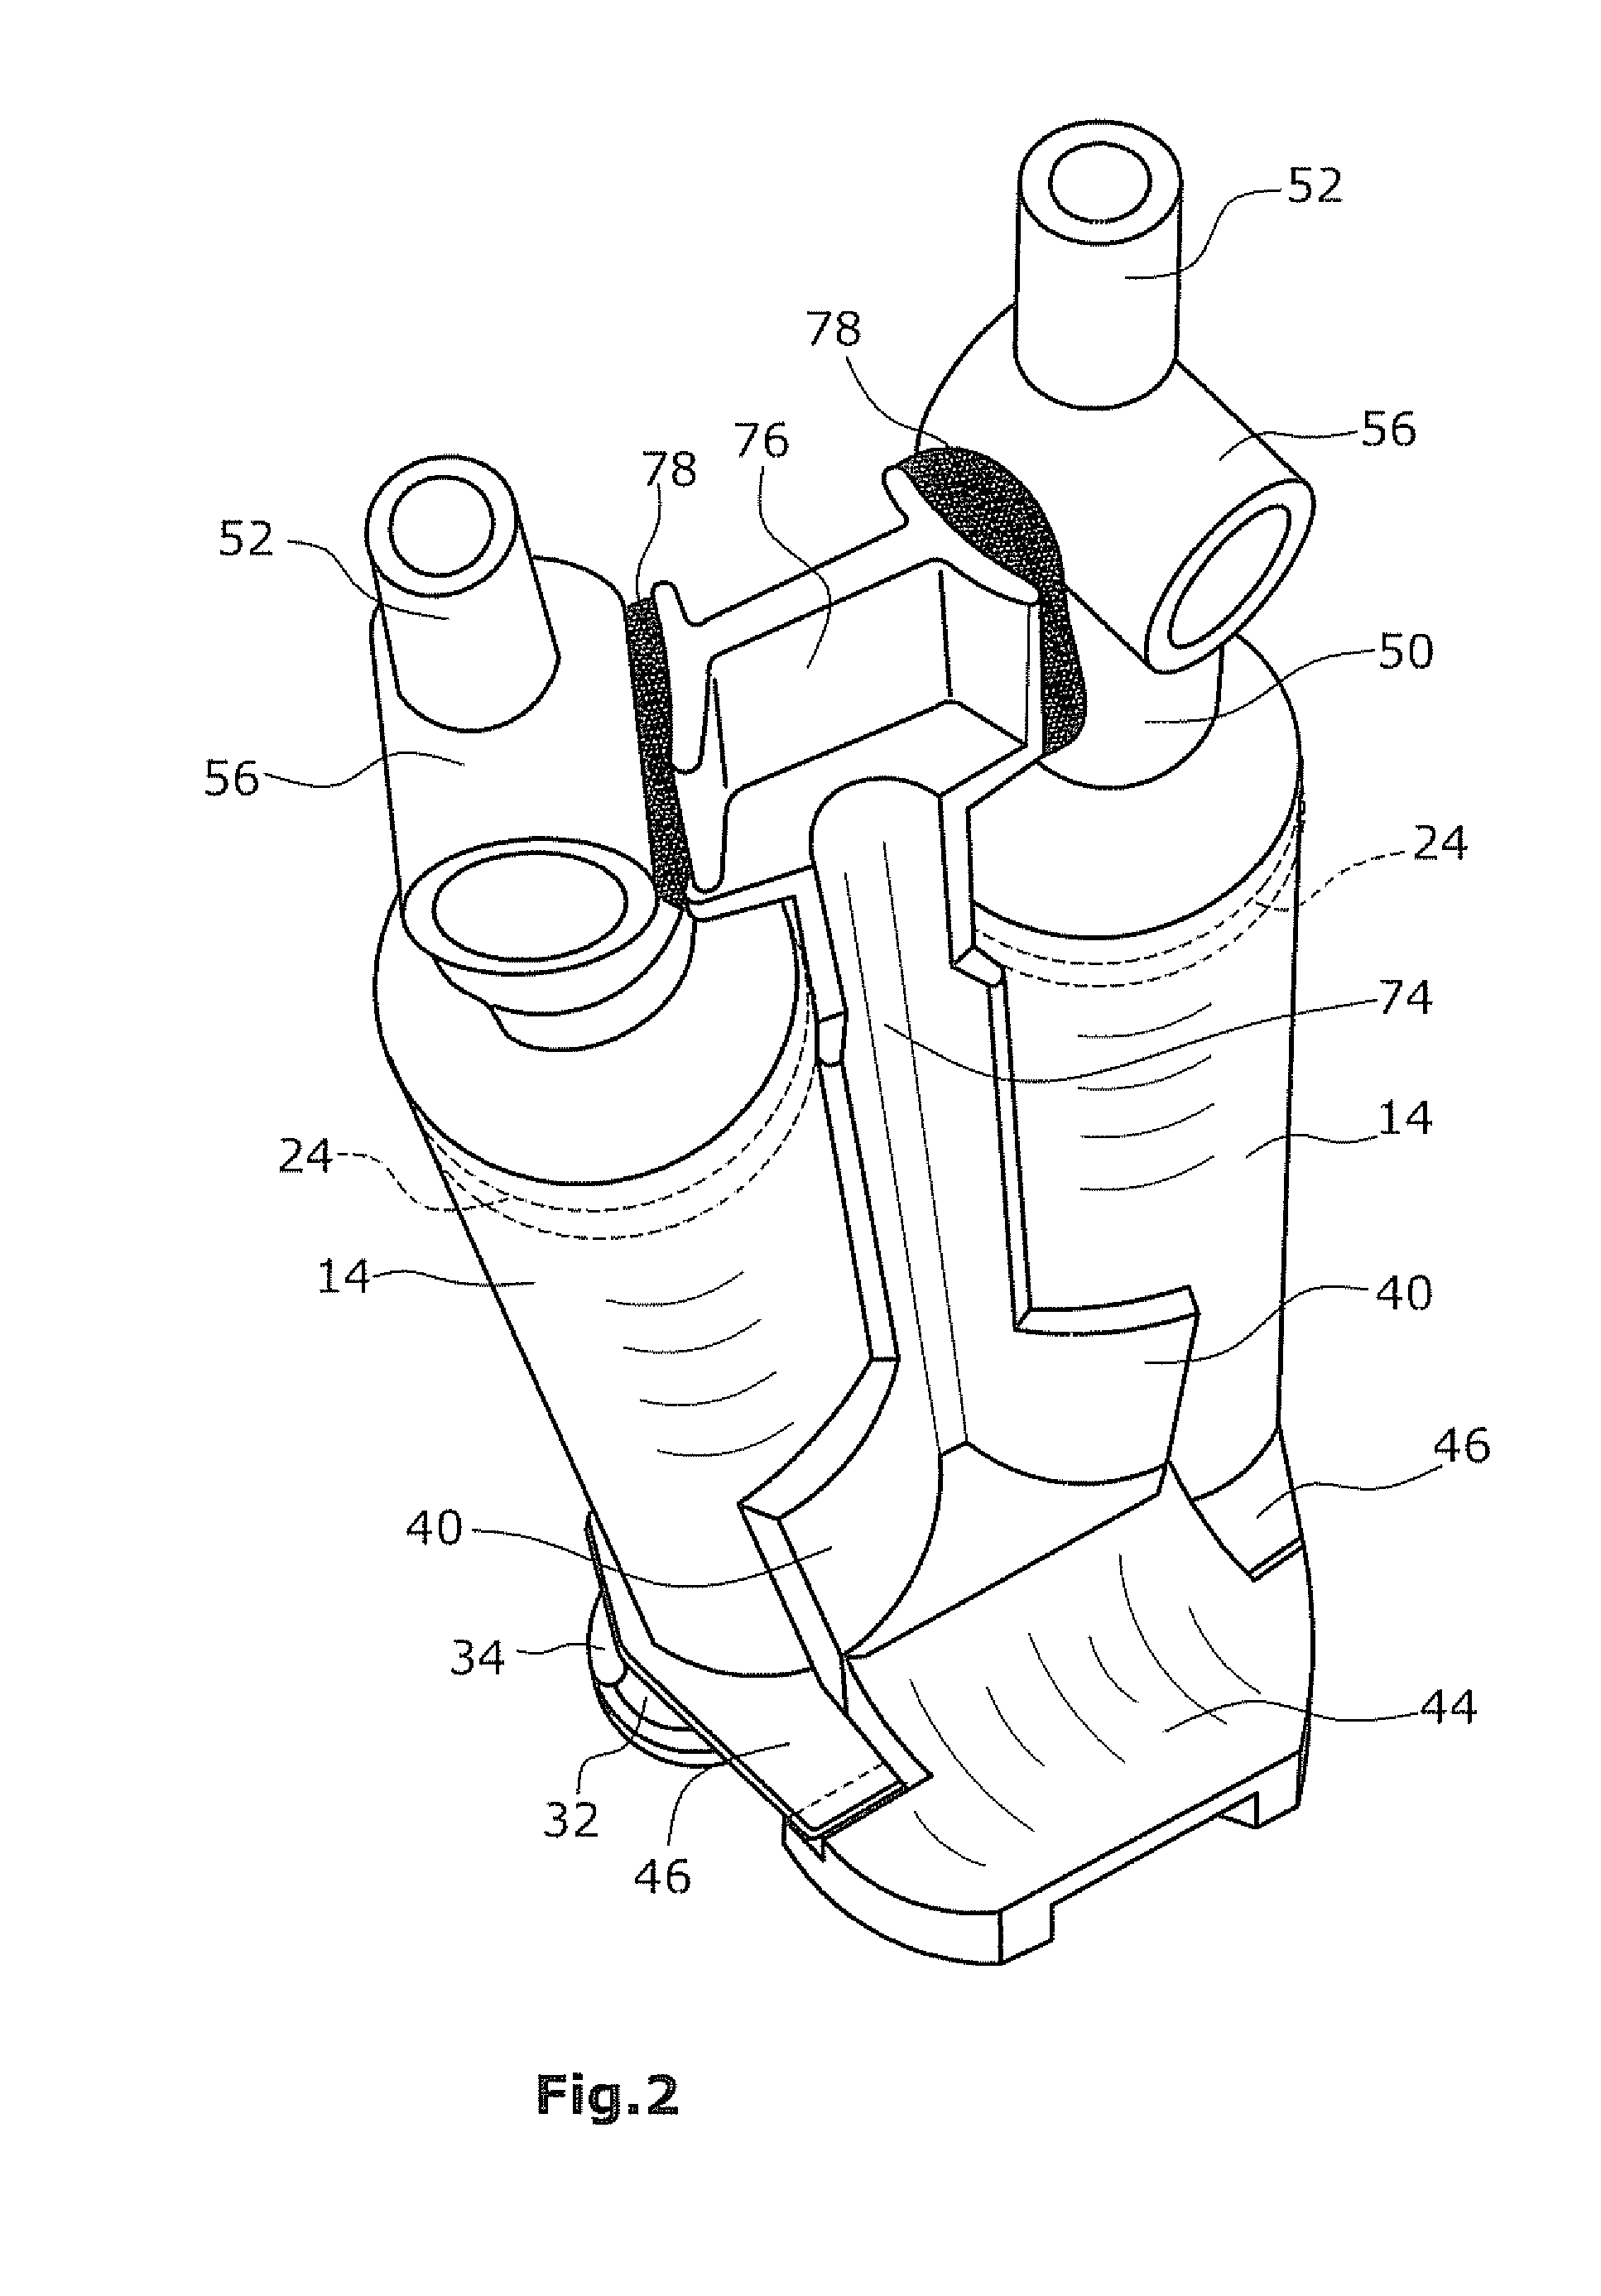 Applicator device for applying a multi-component fluid